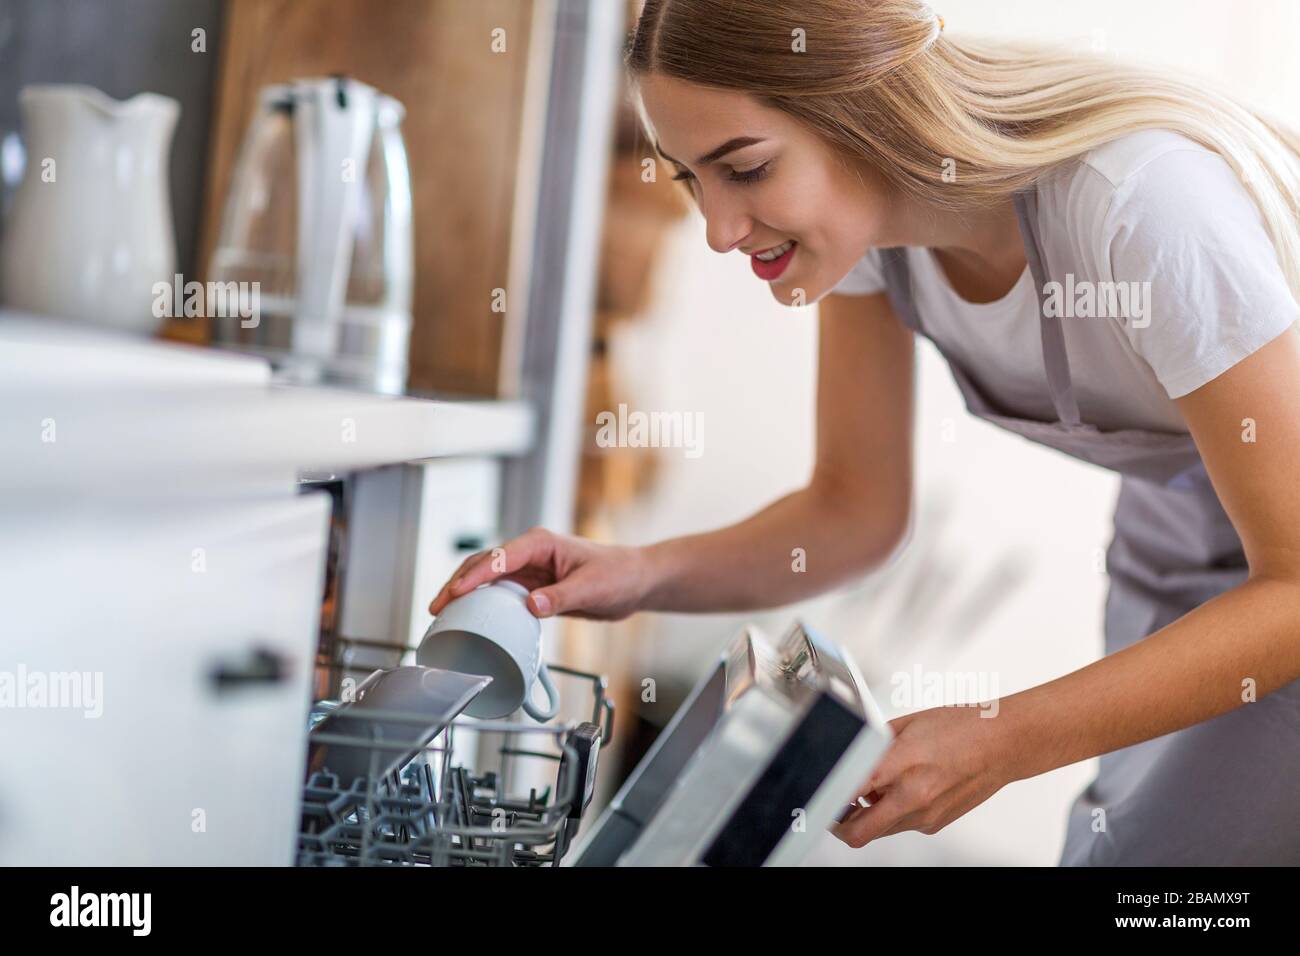 Young woman in the kitchen Stock Photo